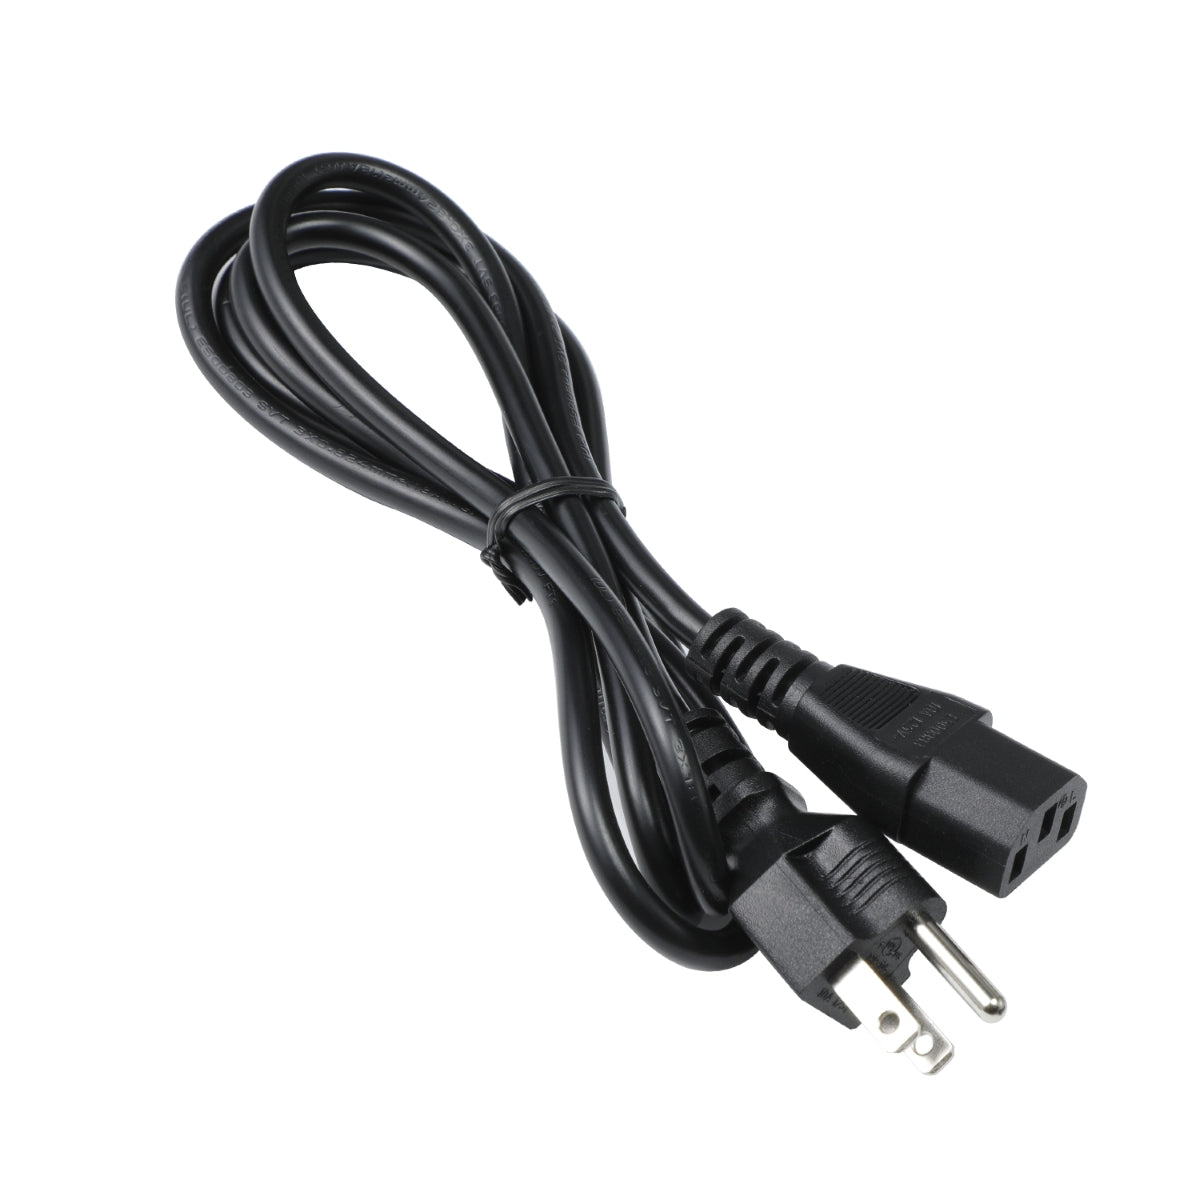 Power Cord for Acer CM2241W Bmiiprzx Monitor